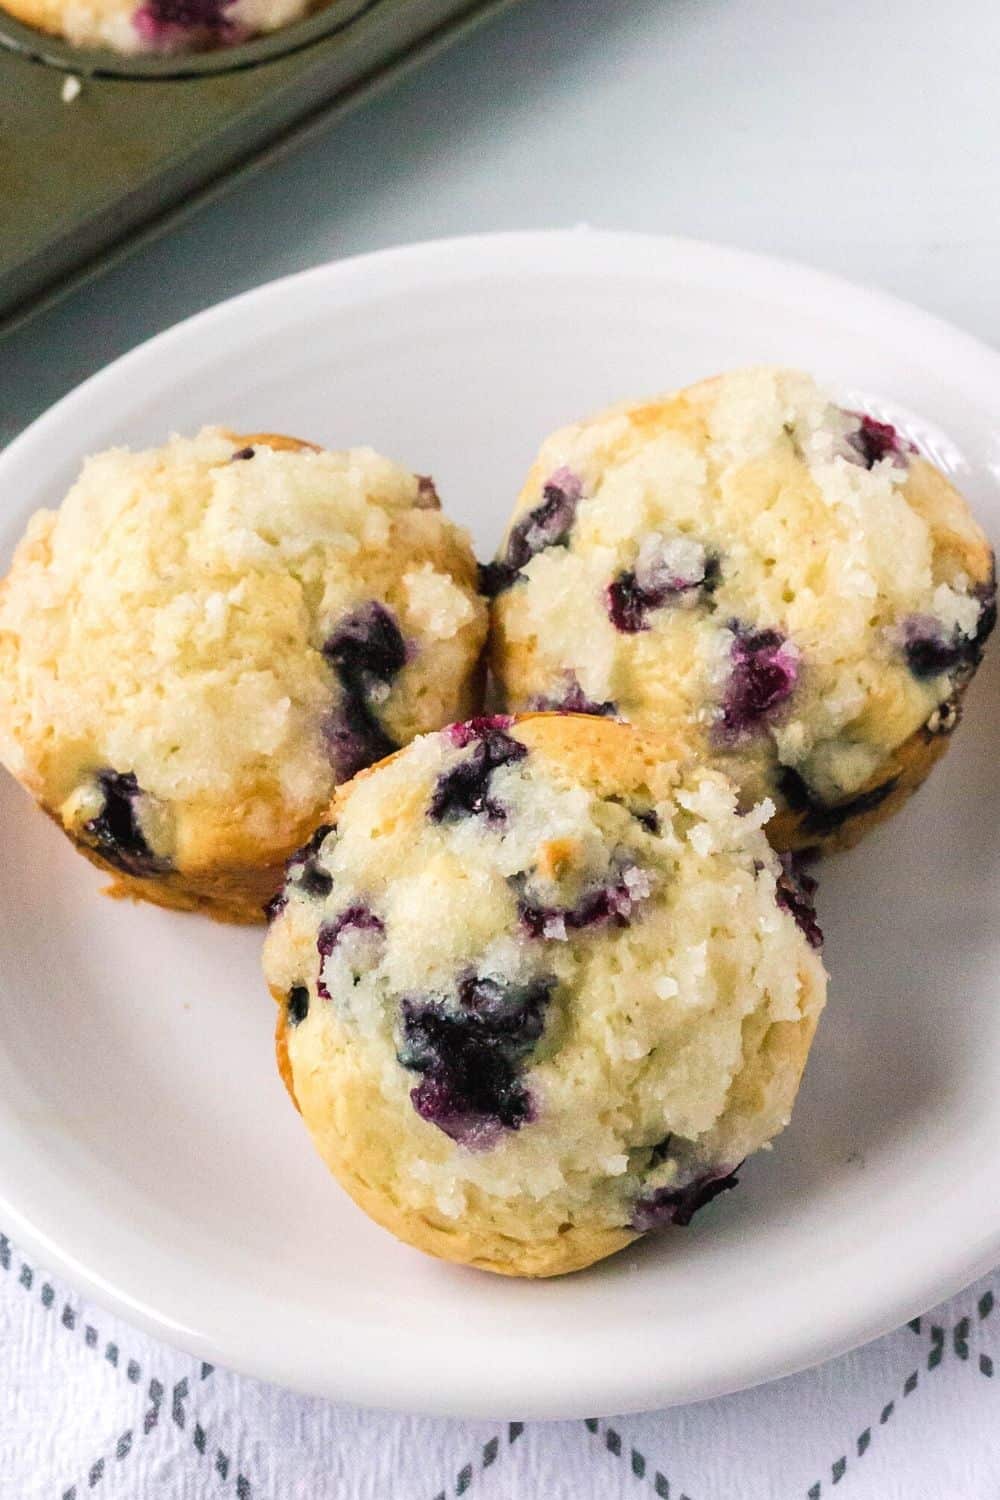 three whole bisquick blueberry muffins on a white plate, showing the sugar streusel topping.